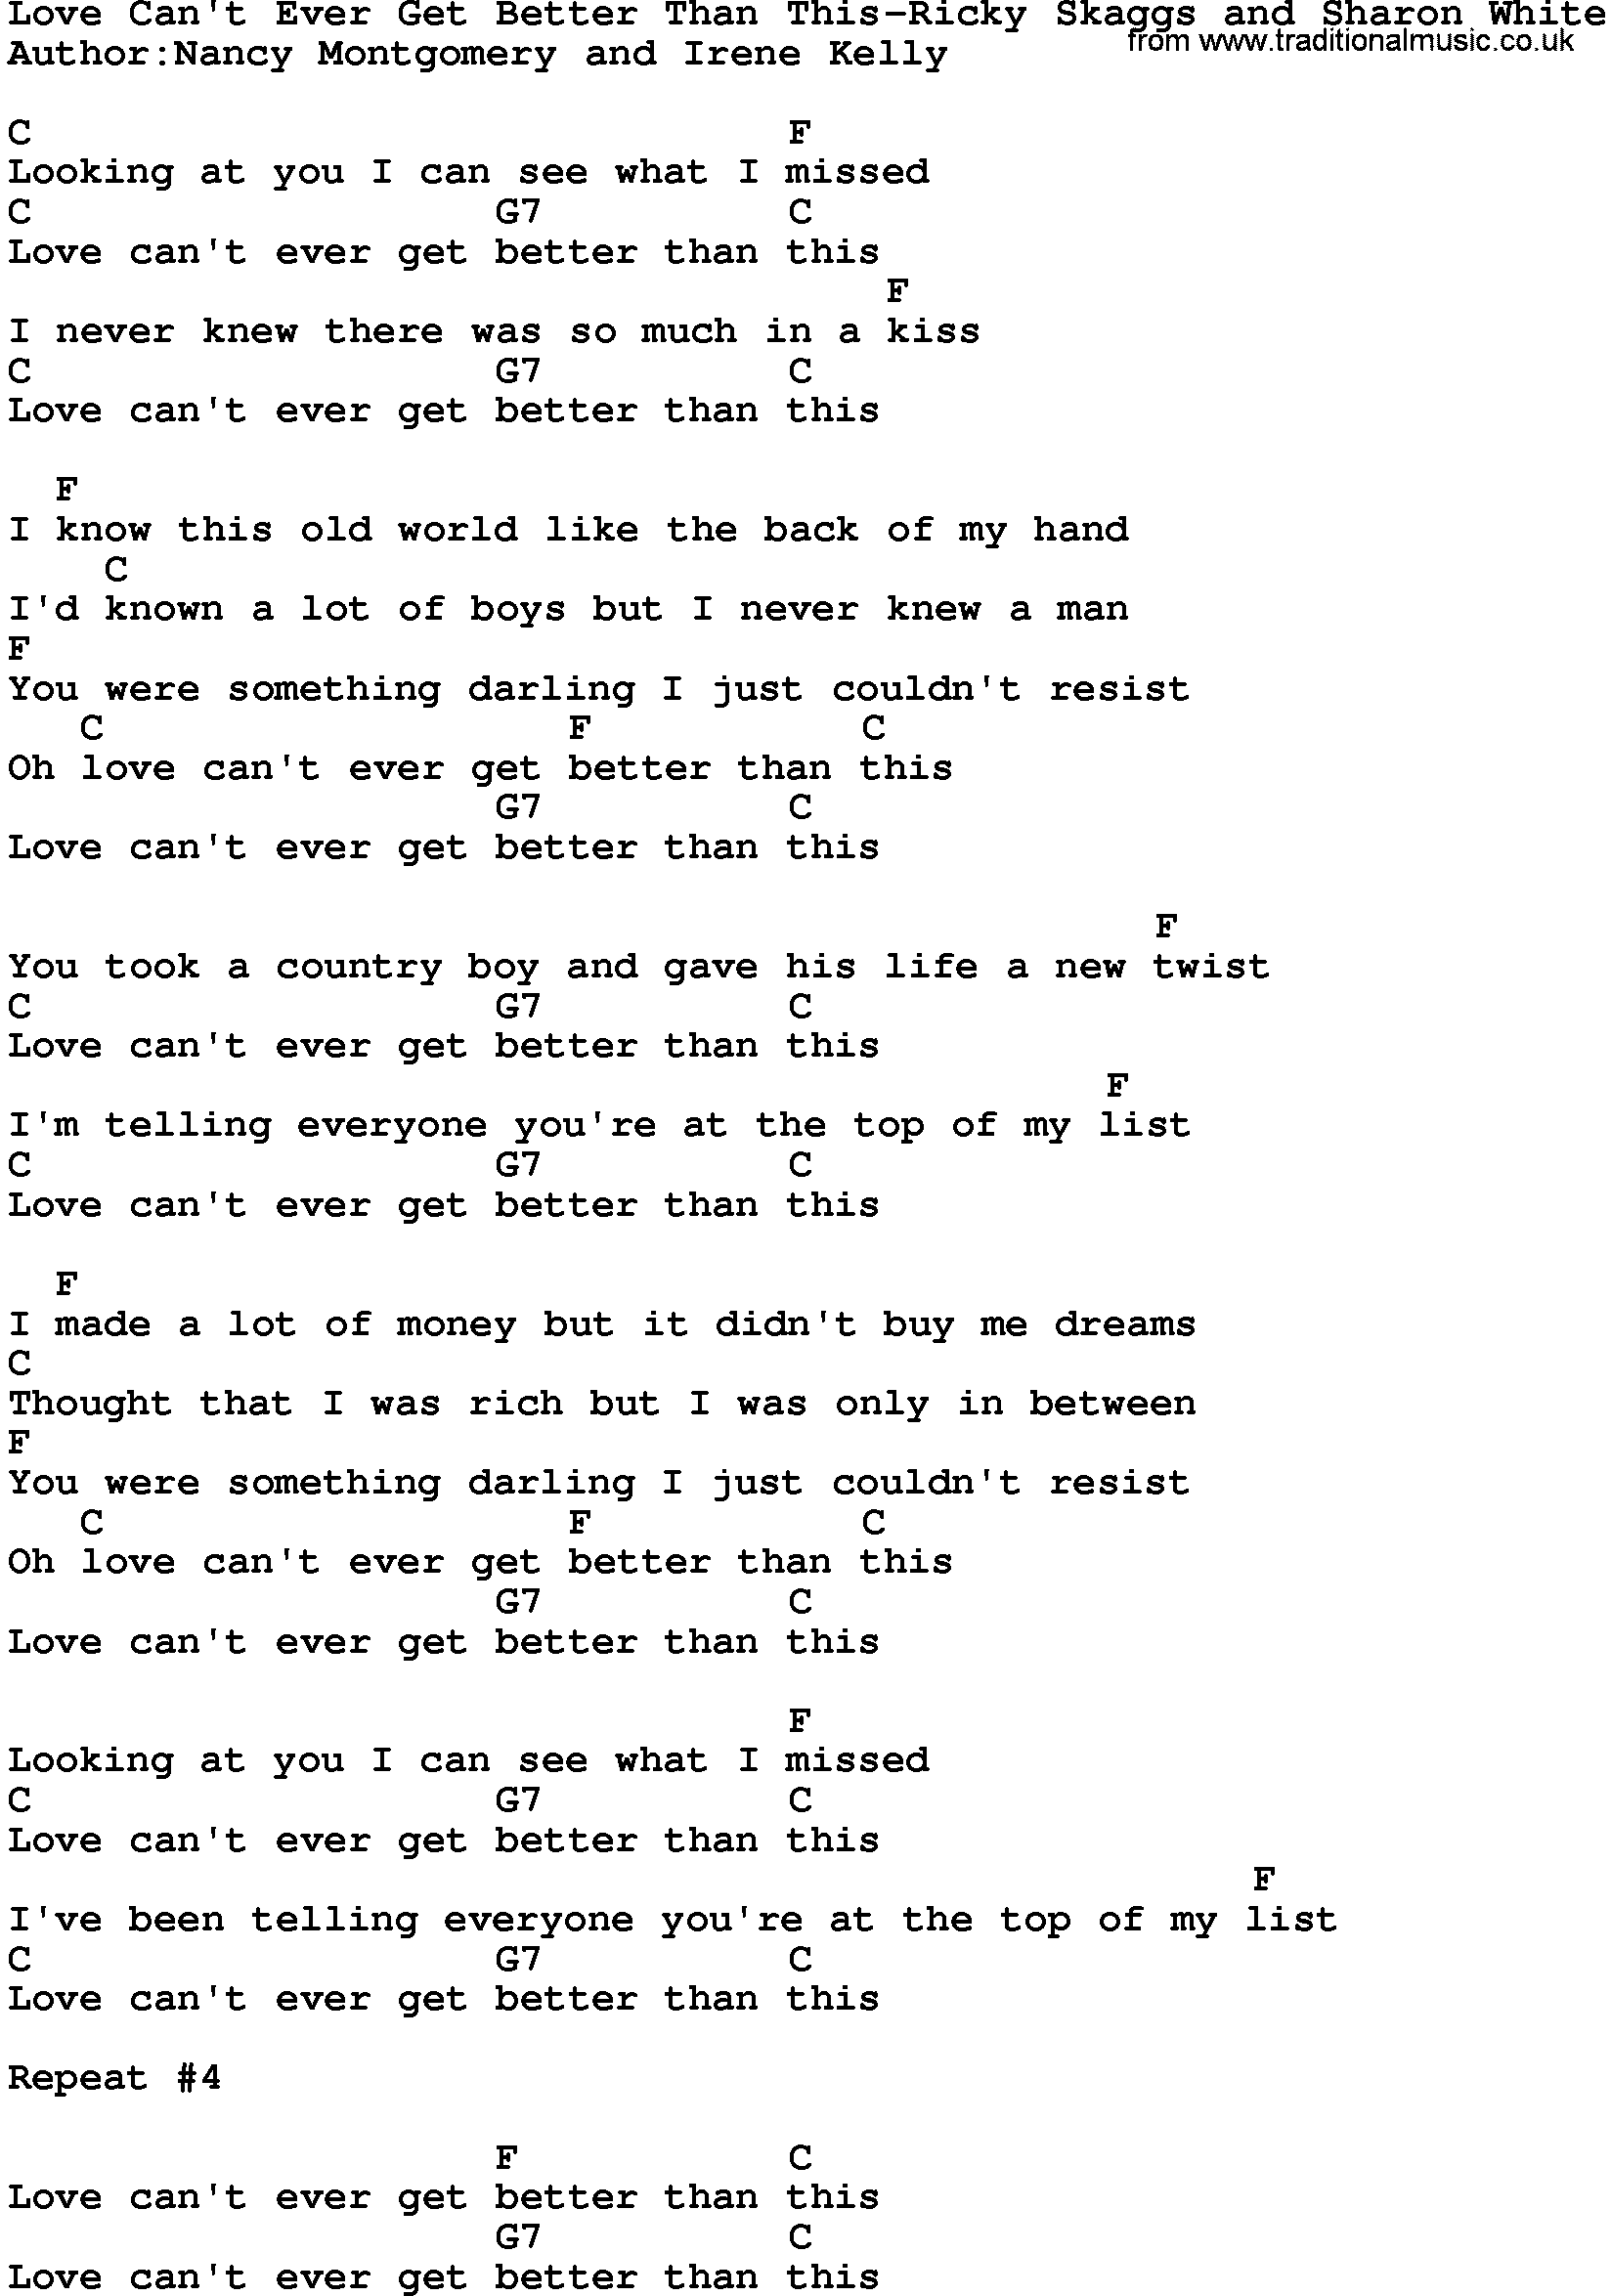 Country music song: Love Can't Ever Get Better Than This-Ricky Skaggs And Sharon White lyrics and chords